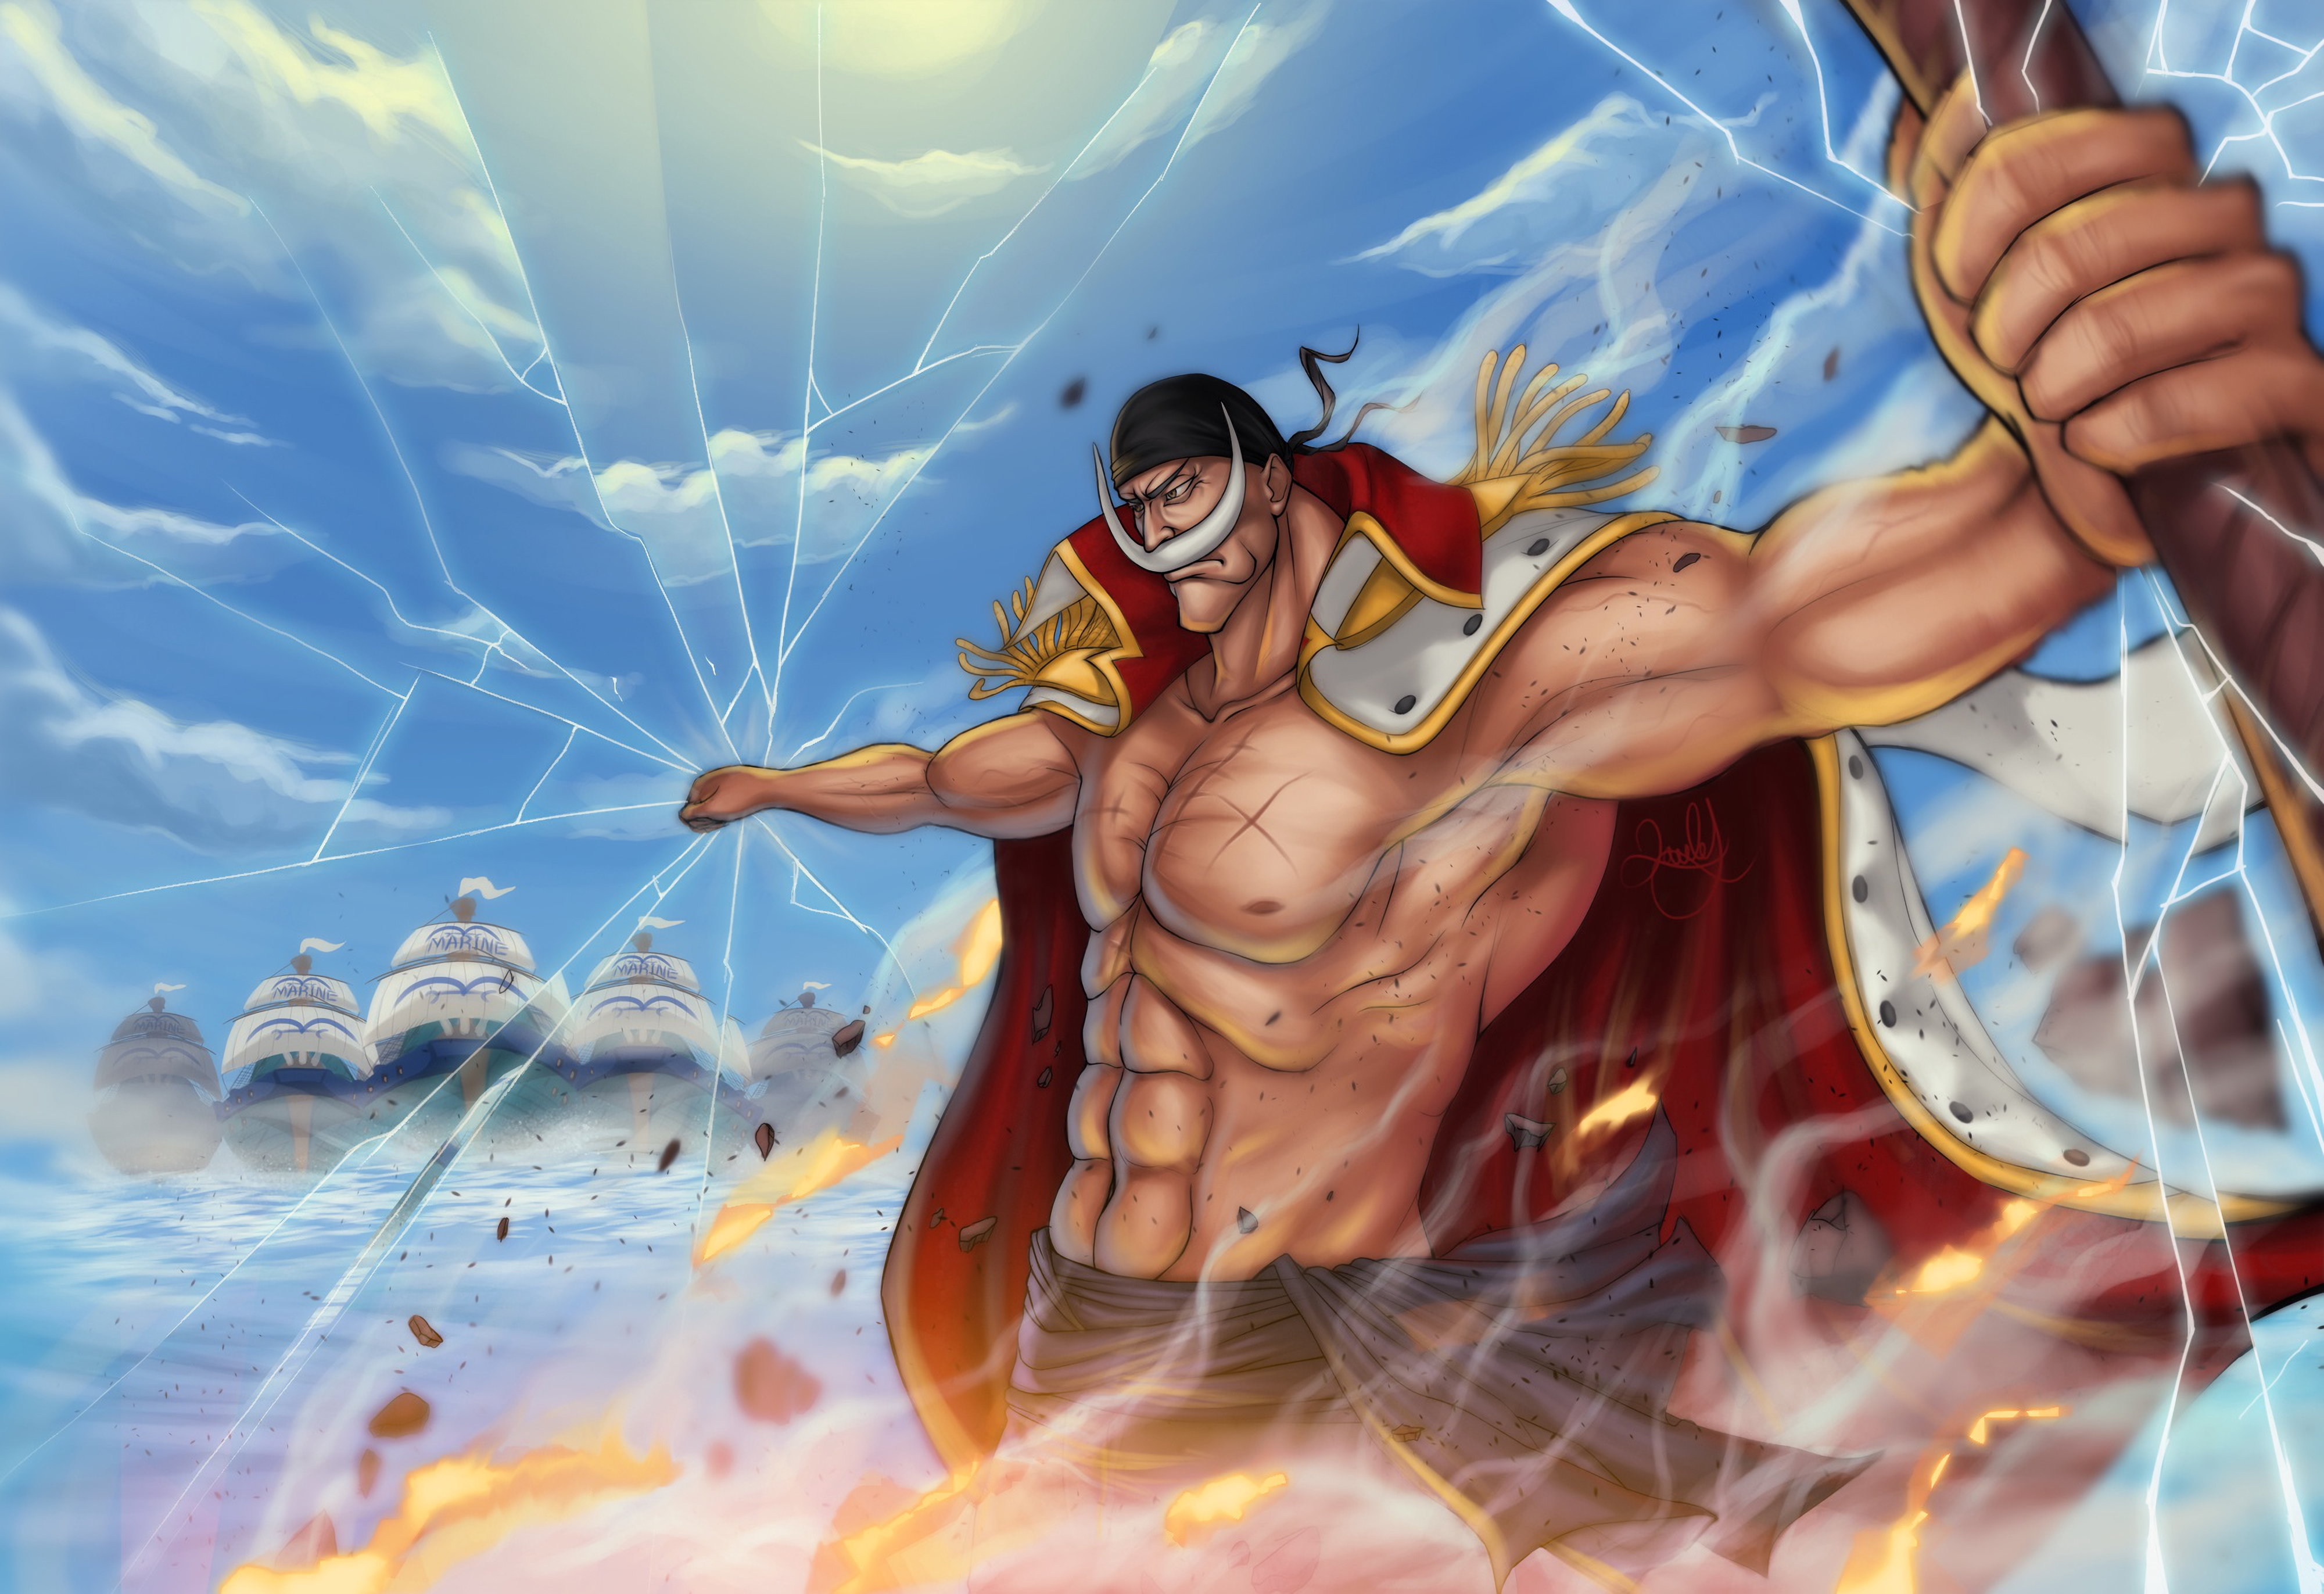 700+ 4K Anime One Piece Wallpapers | Background Images